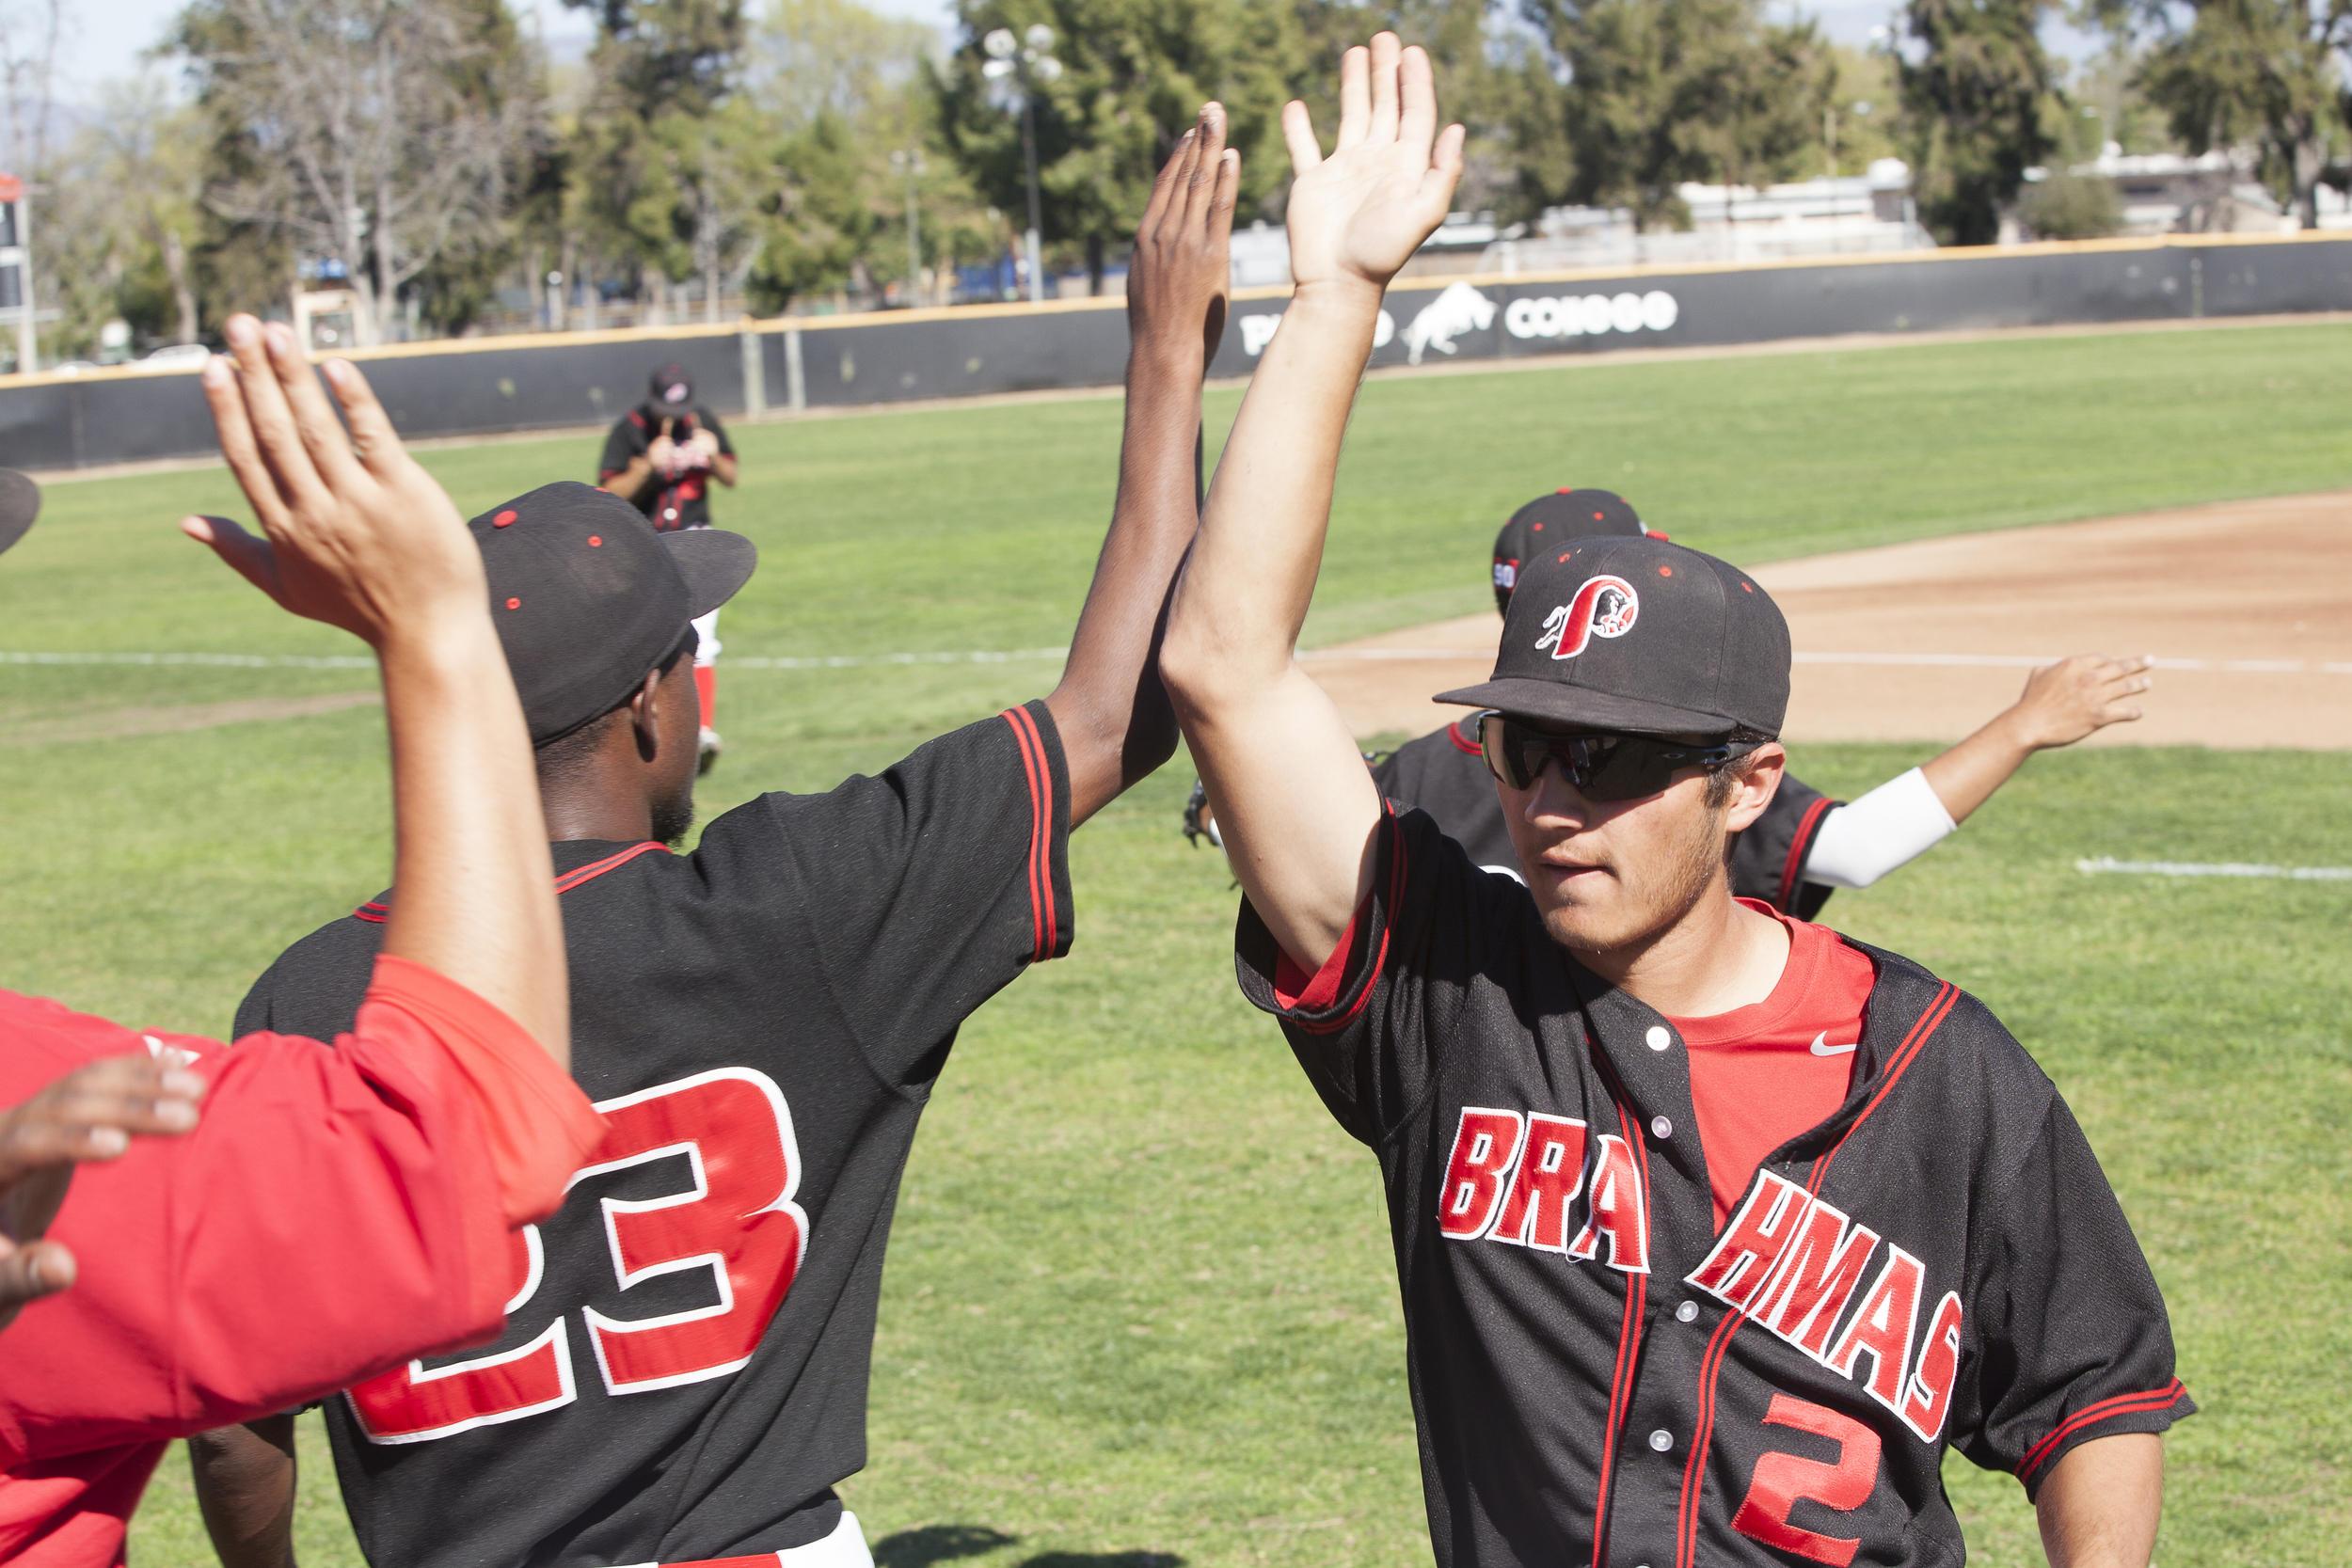  Jordan Abushahla, right, receives high fives from teammates as he walks to the dugout after the top of the first inning in a home game against Glendale College in Woodland Hills, Calif. on Saturday, Feb. 13, 2016.&nbsp; 